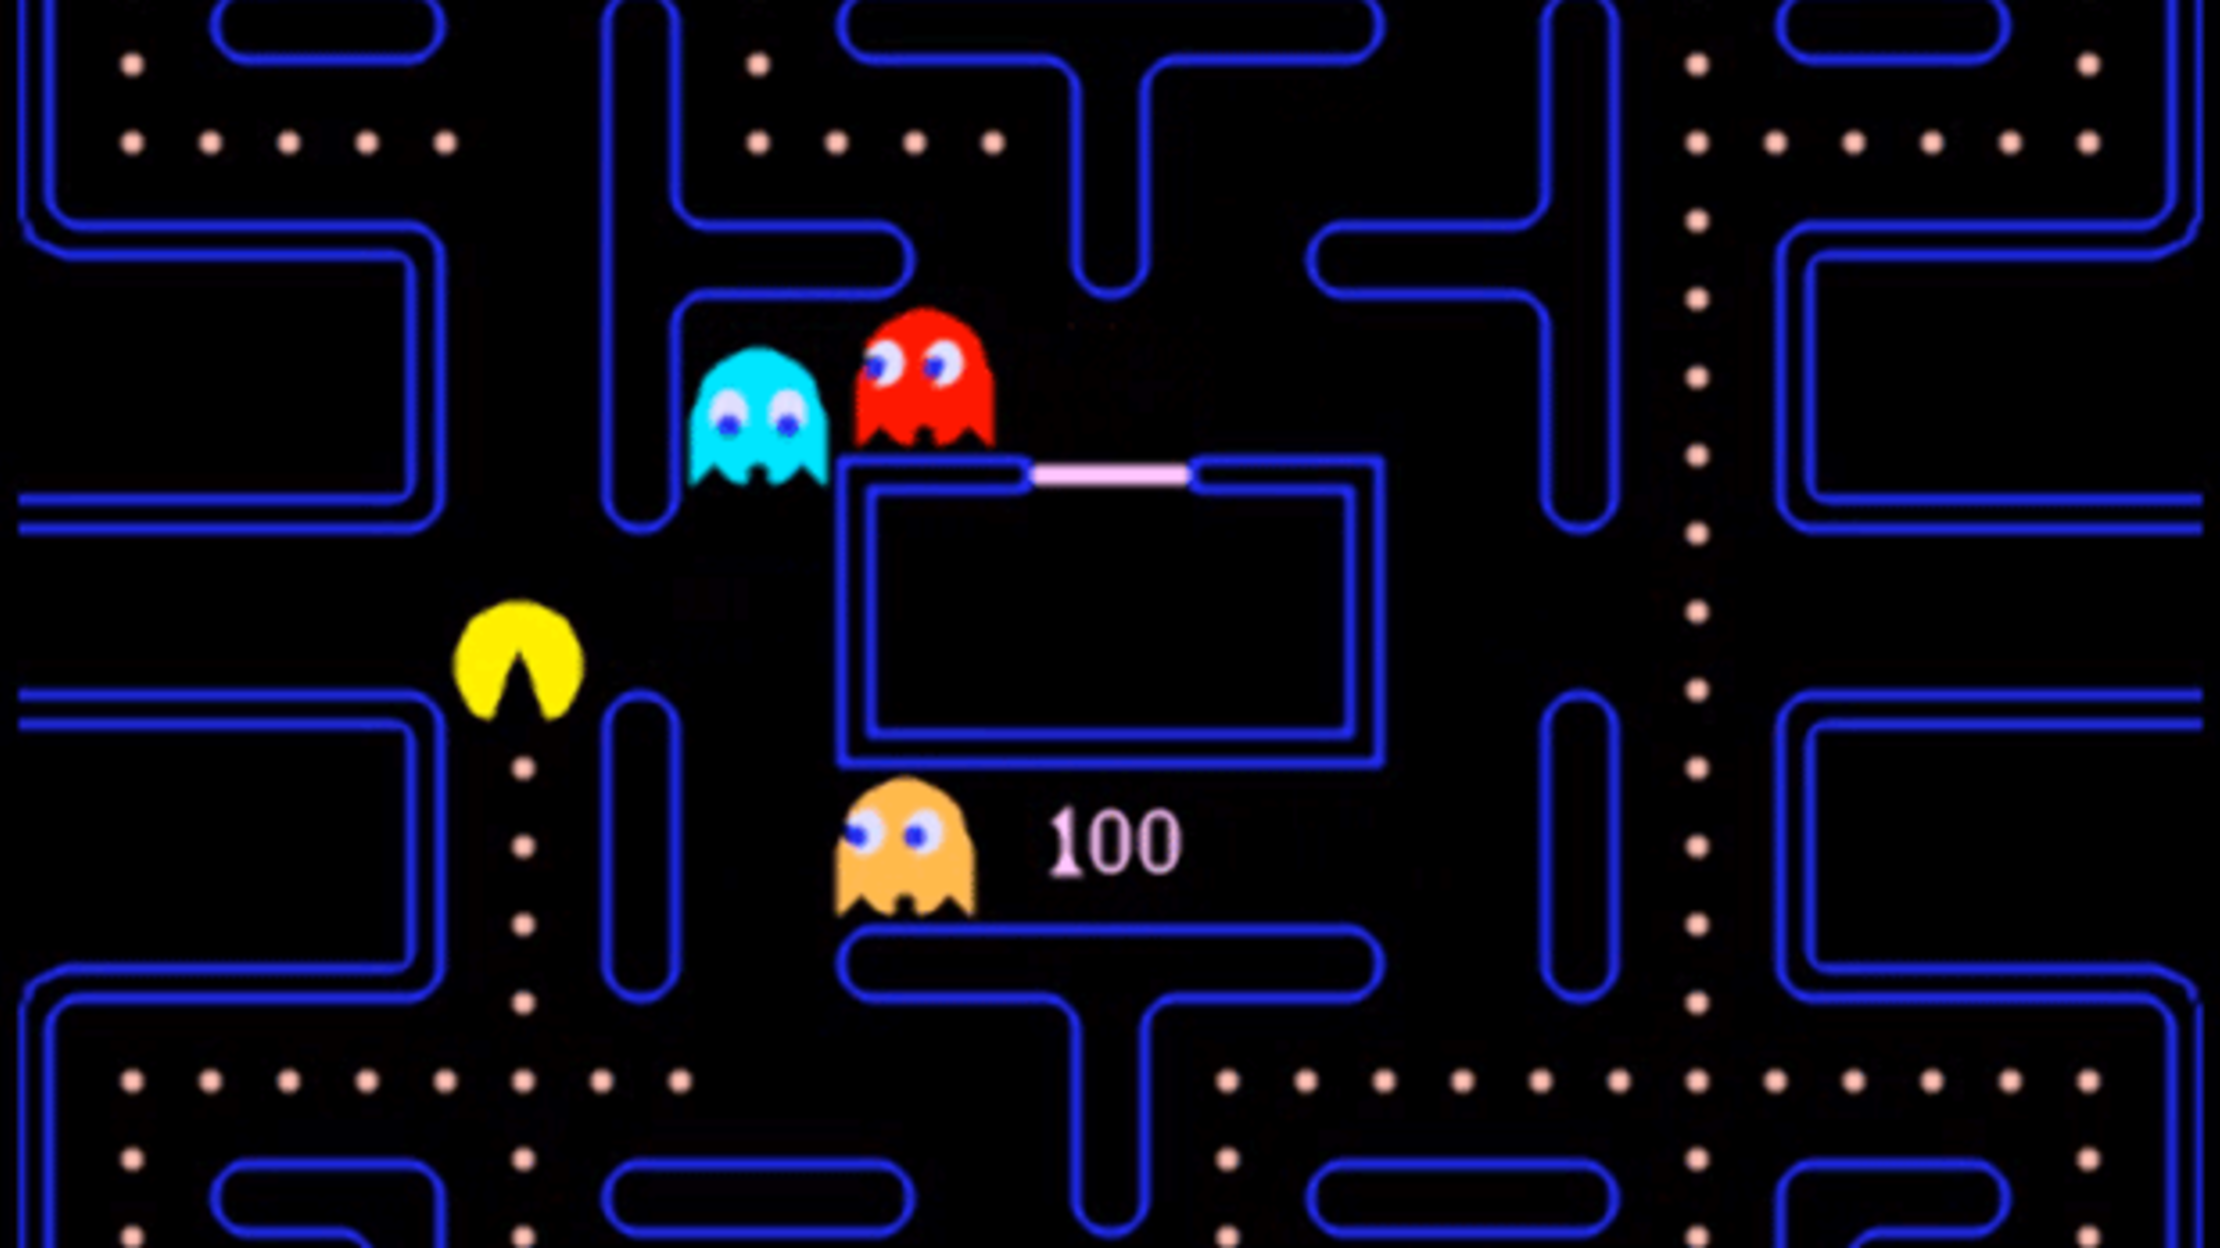 Have you play the classic “Pac-Man” game before?